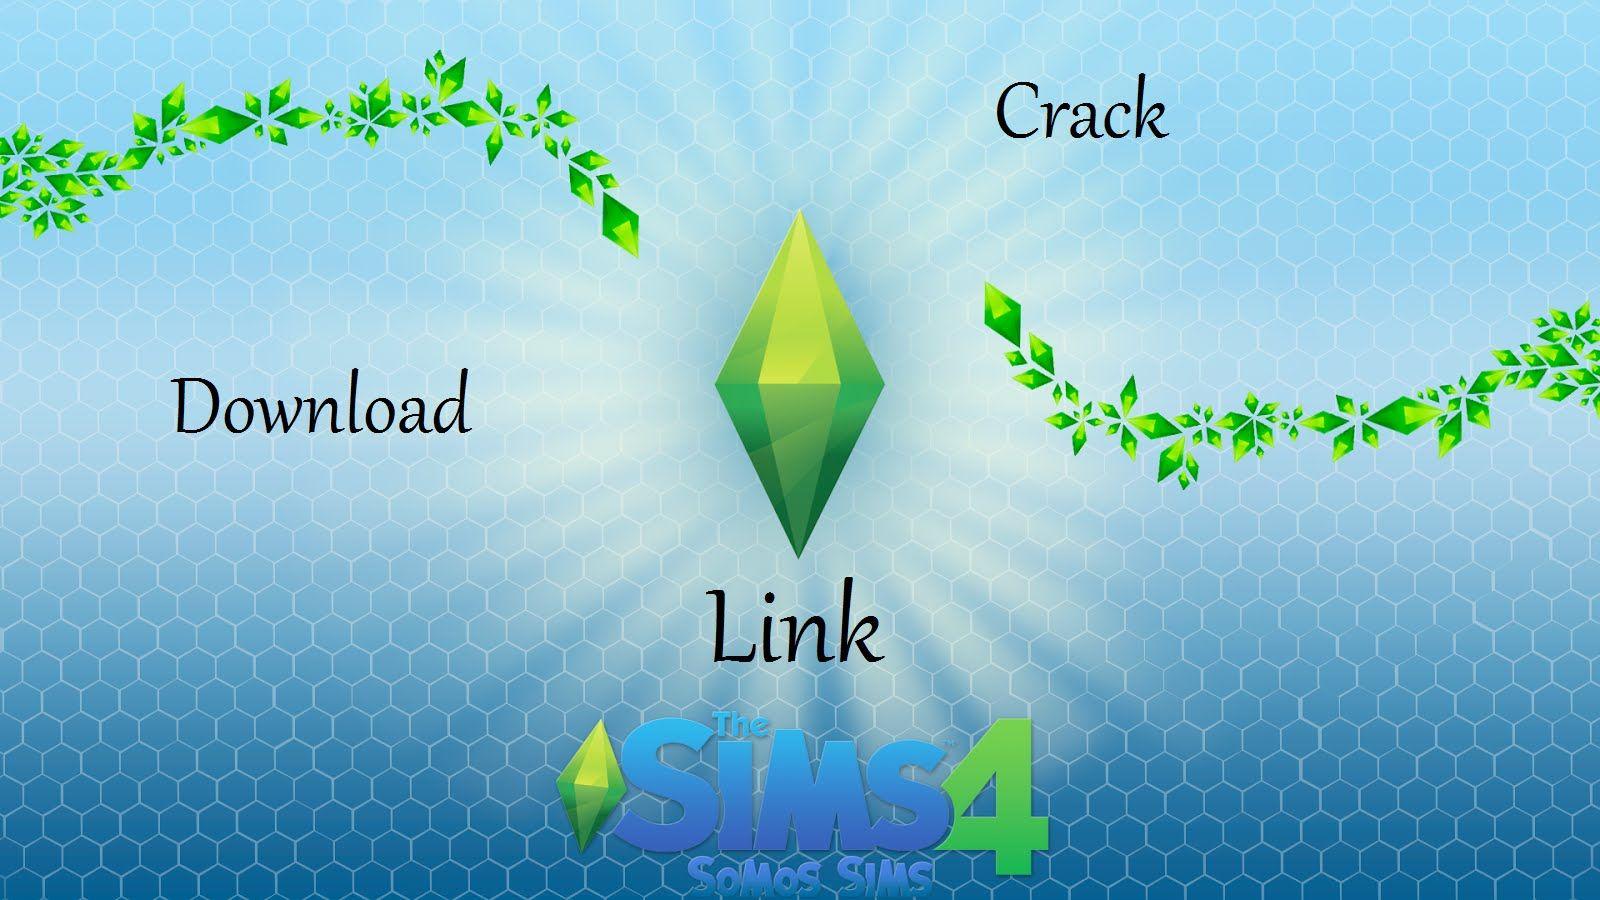 The Sims 4 Download + Crack + Link